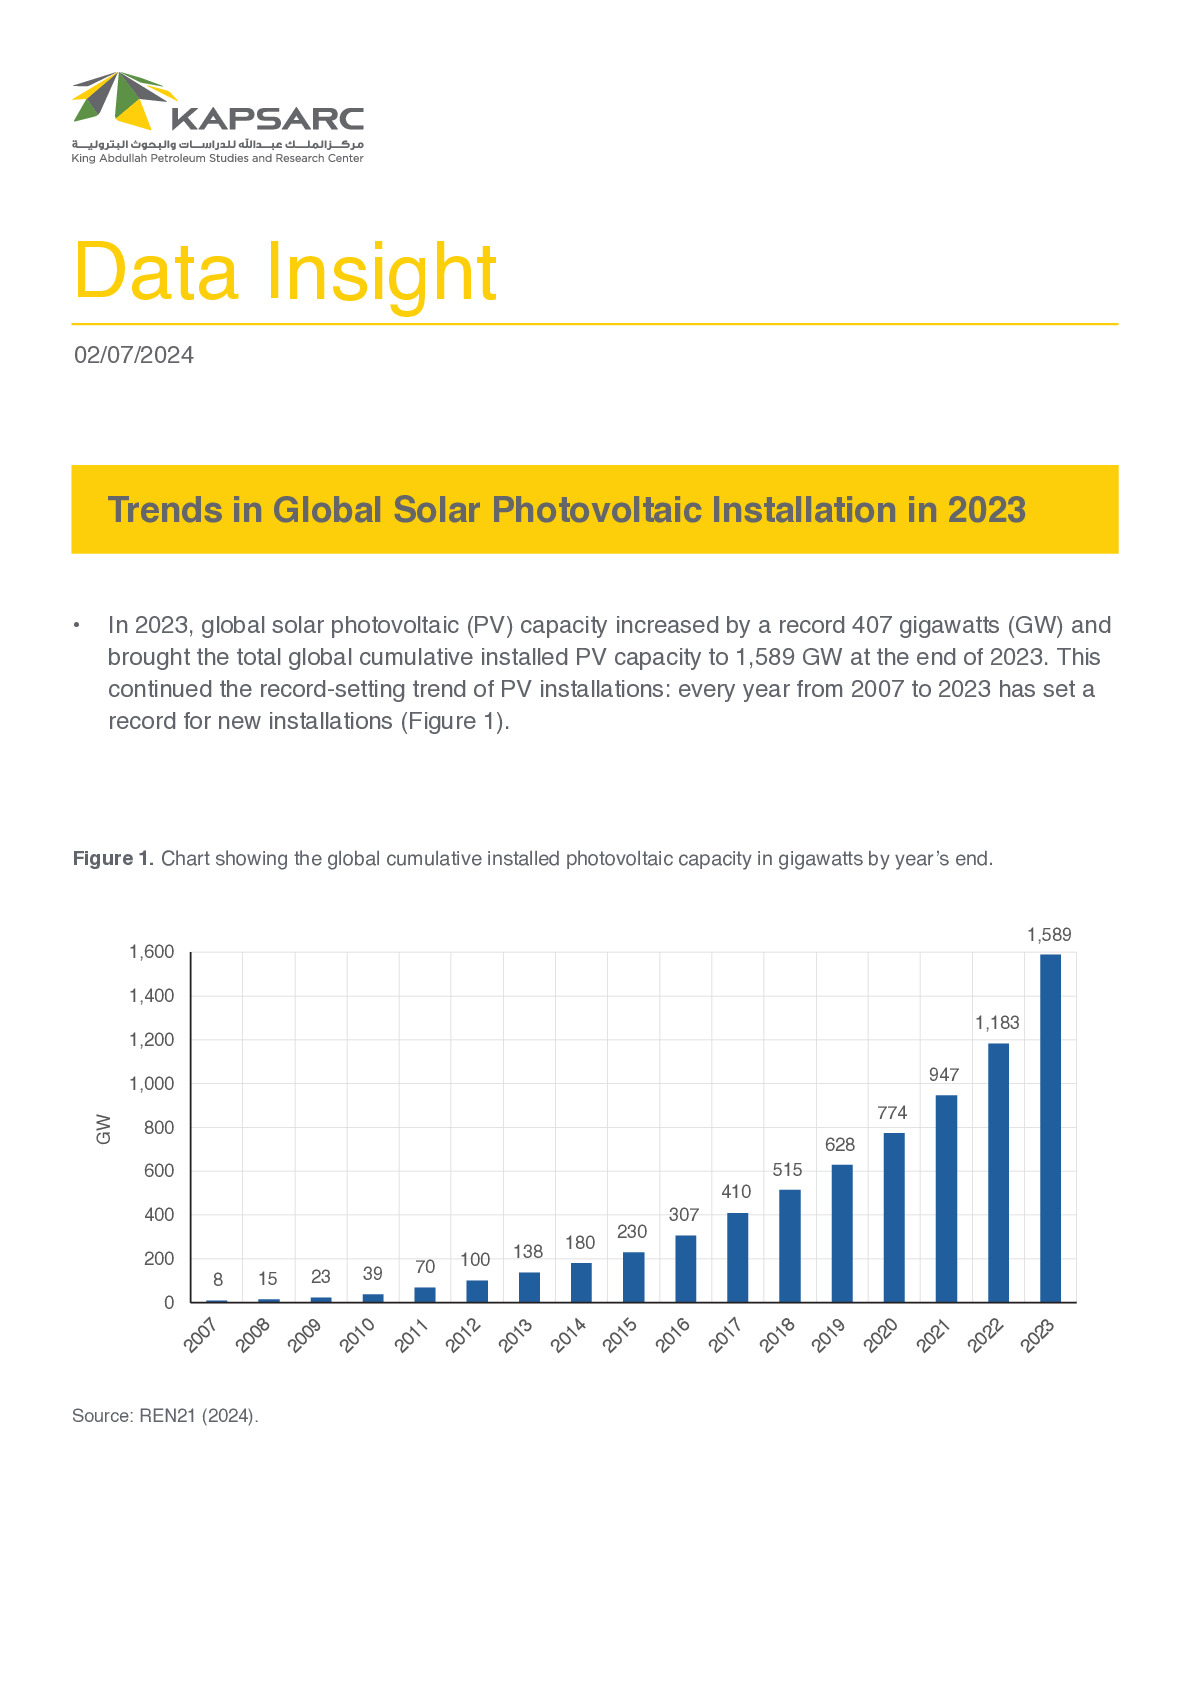 Trends in Global Solar Photovoltaic Installation in 2023